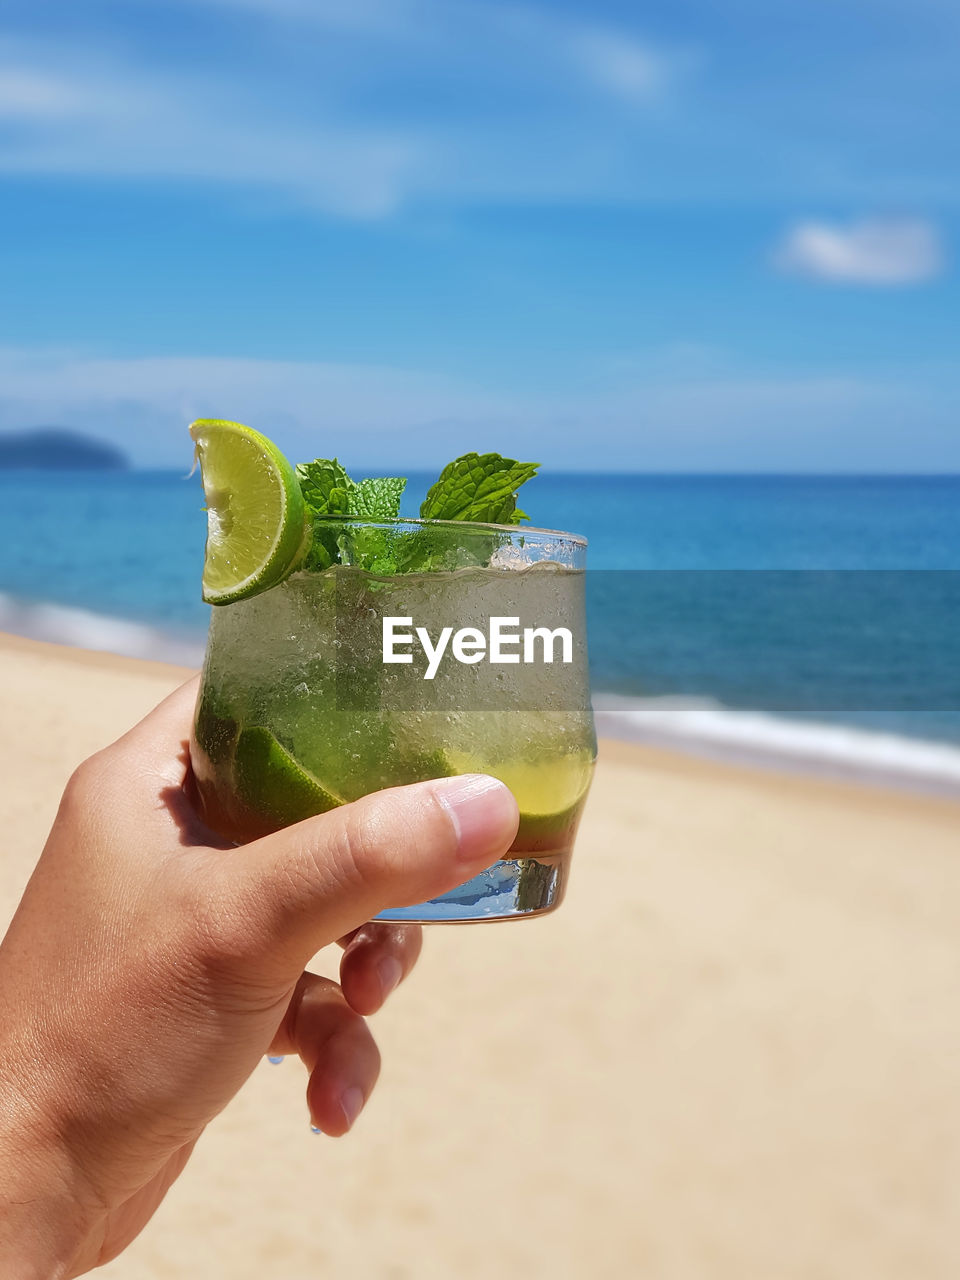 CROPPED IMAGE OF HAND HOLDING DRINK AT BEACH